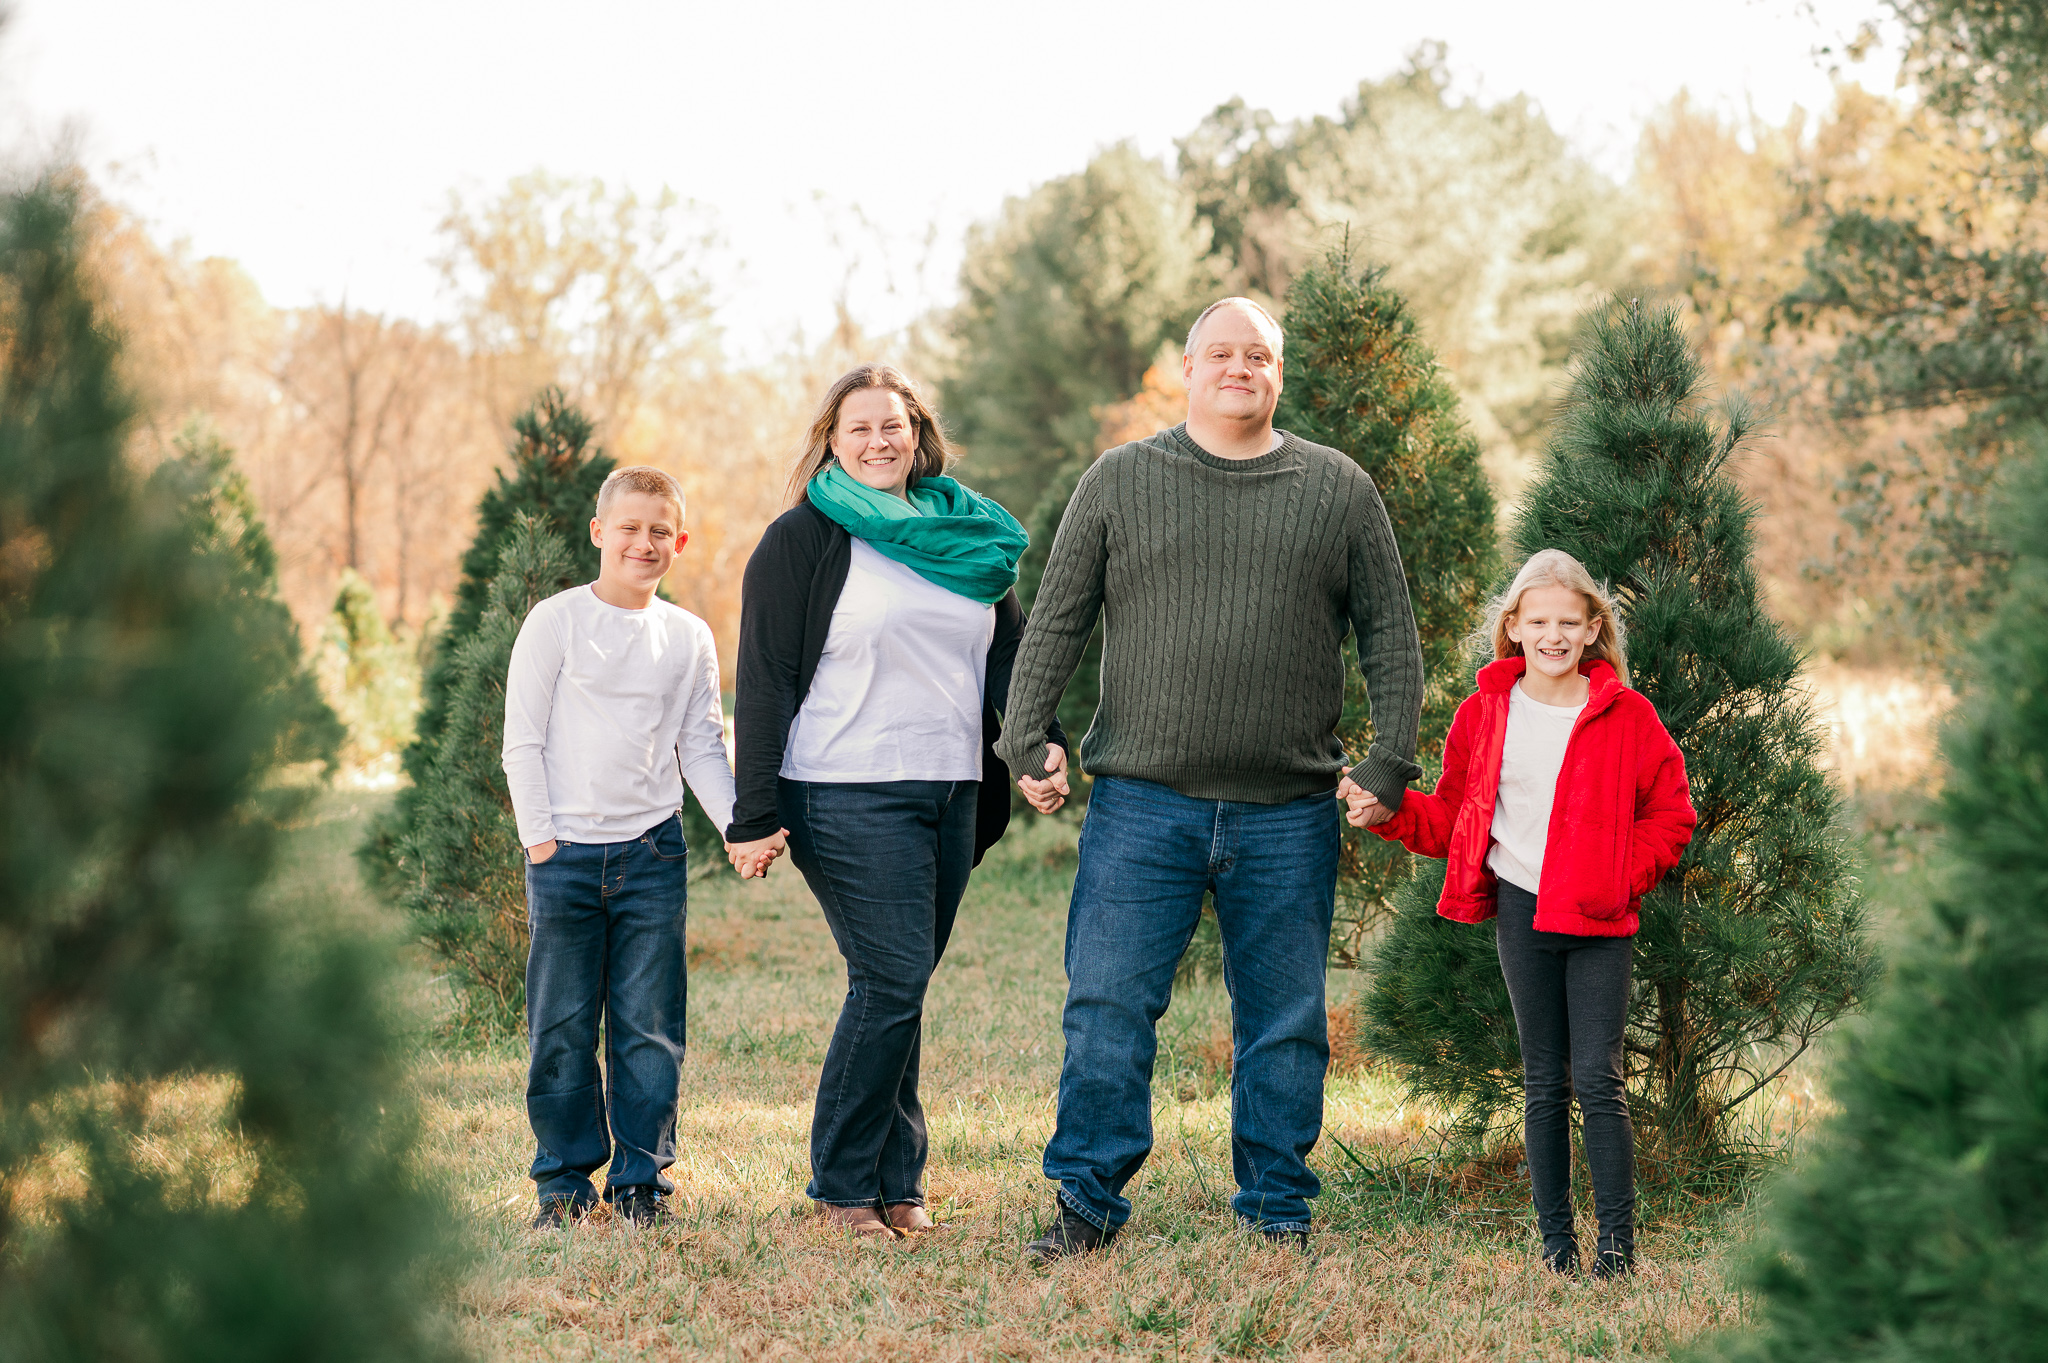 Christmas Tree Mini Sessions with Virginia Family Photographer Kailey Brianne Photography